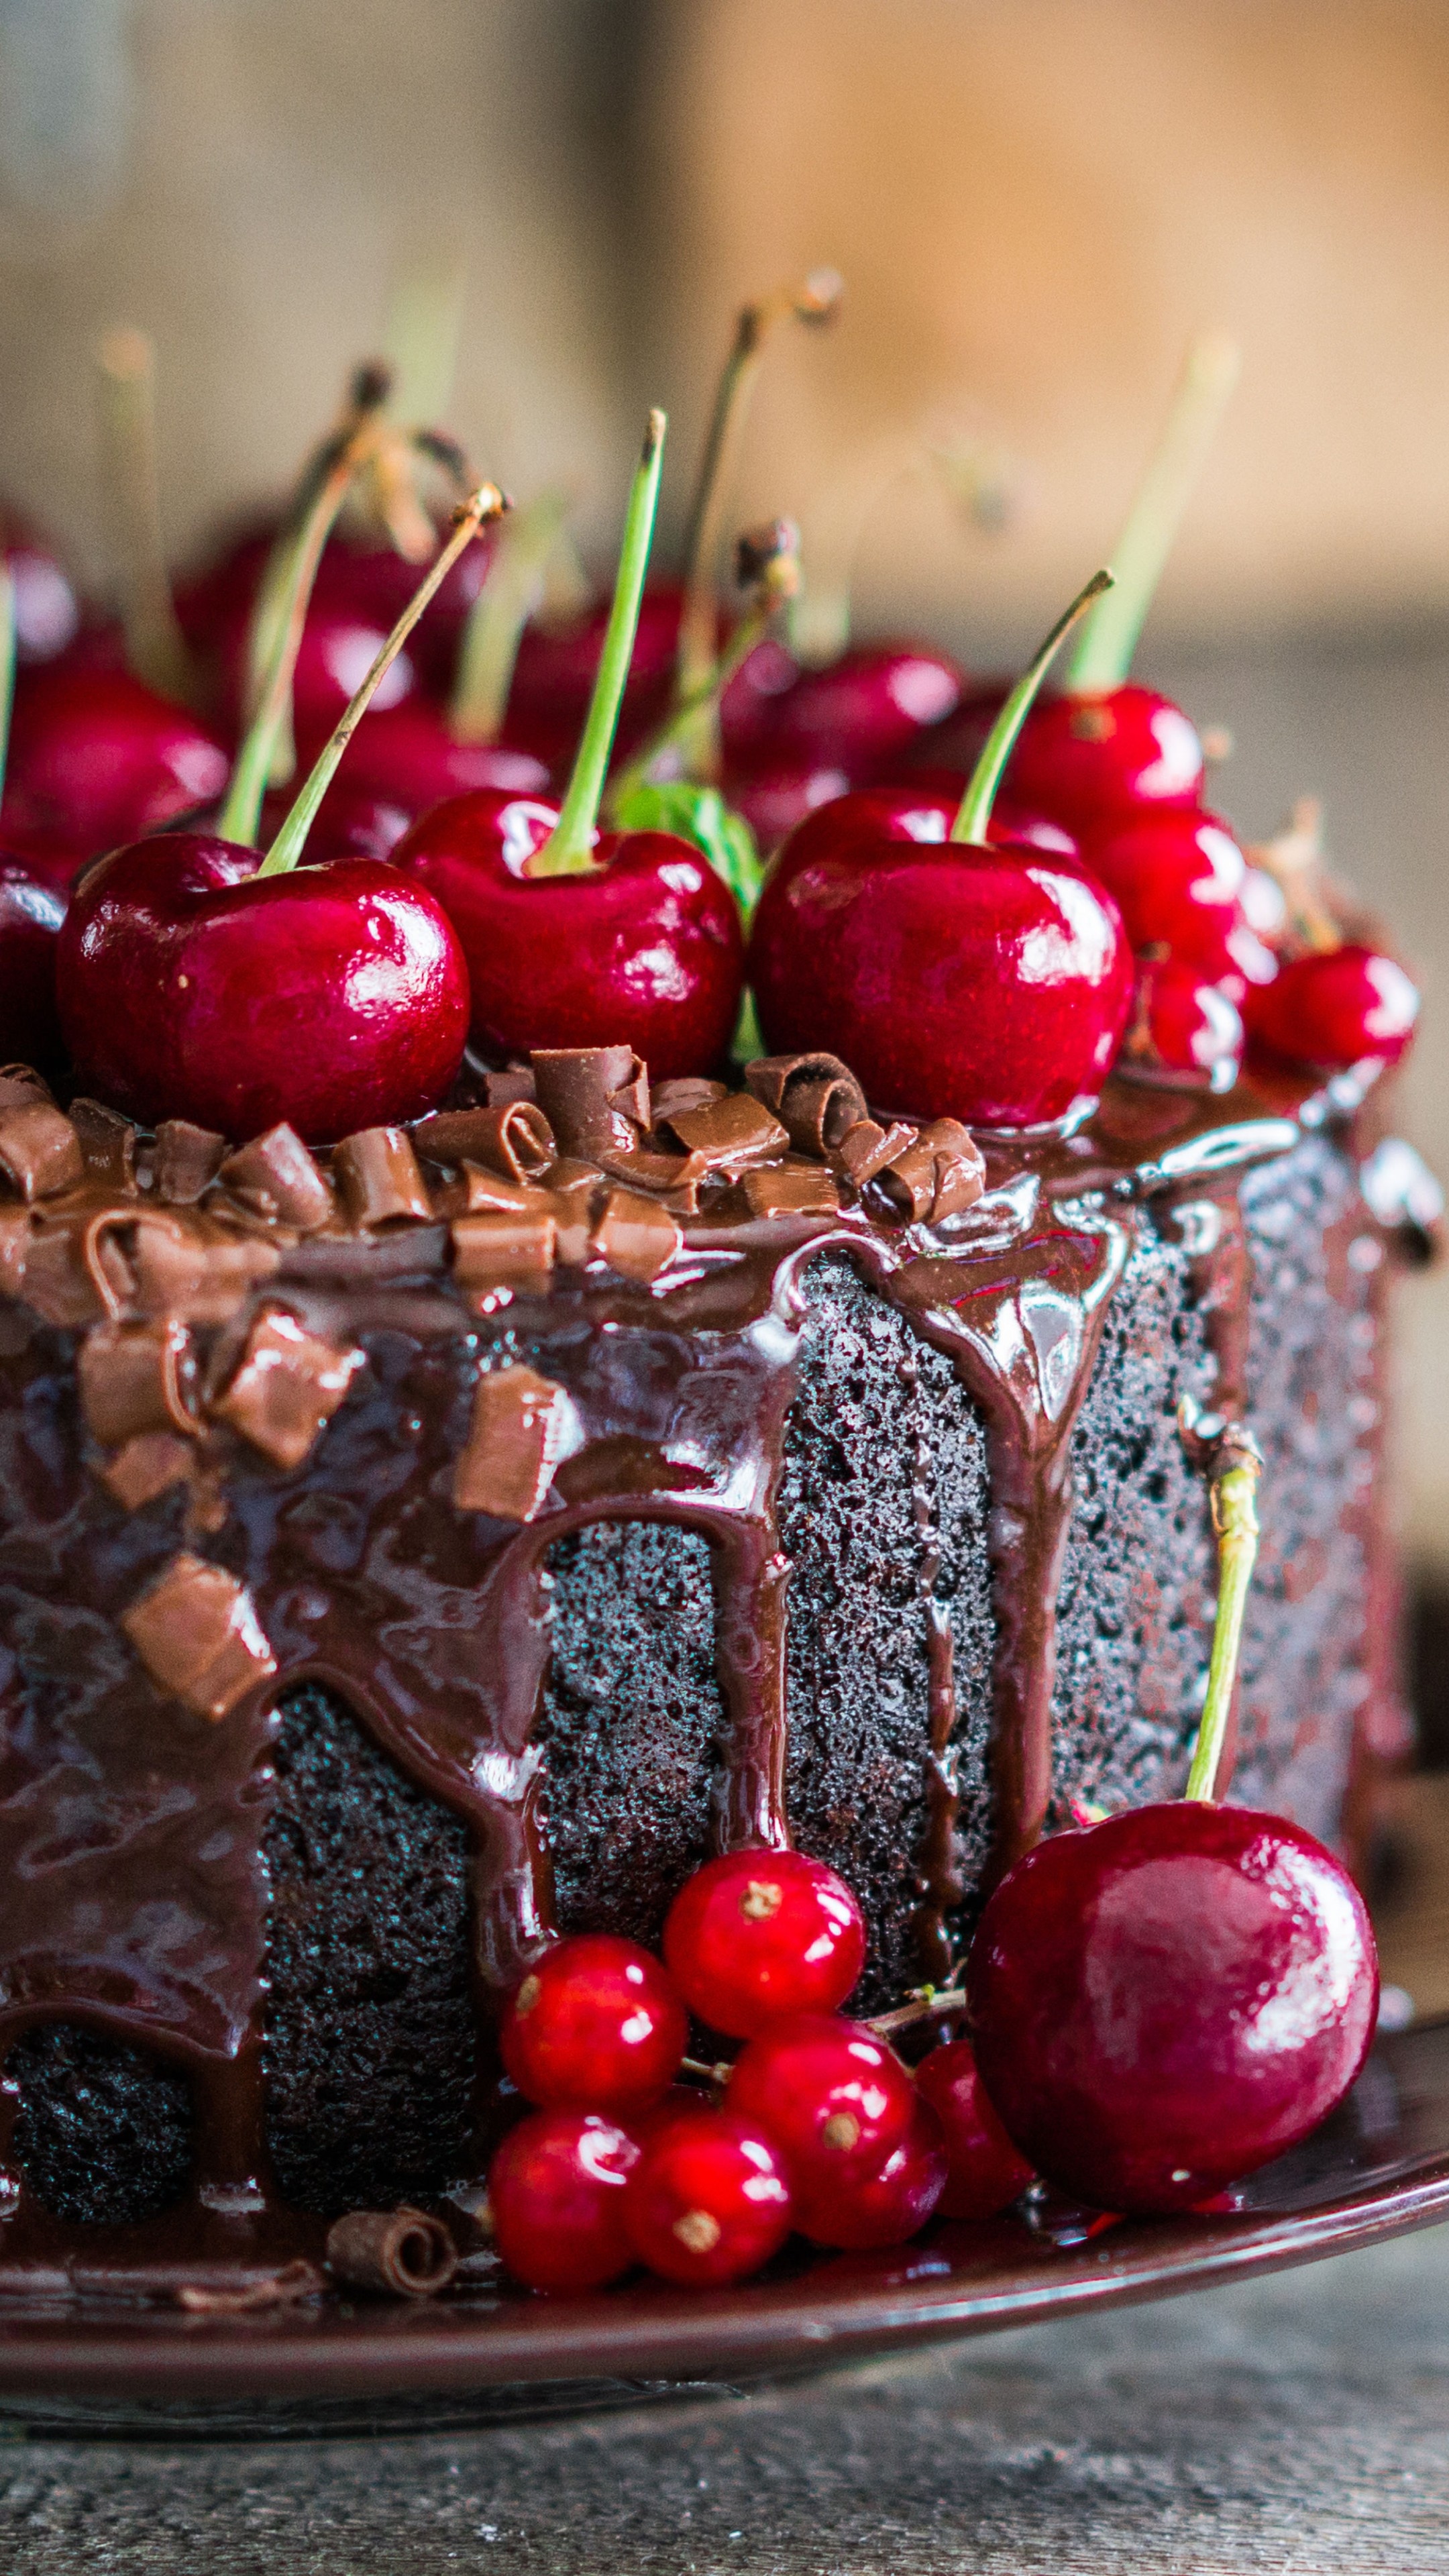 Cake: Decorated with marzipan, piped borders, or candied fruit, Cherry. 2160x3840 4K Wallpaper.